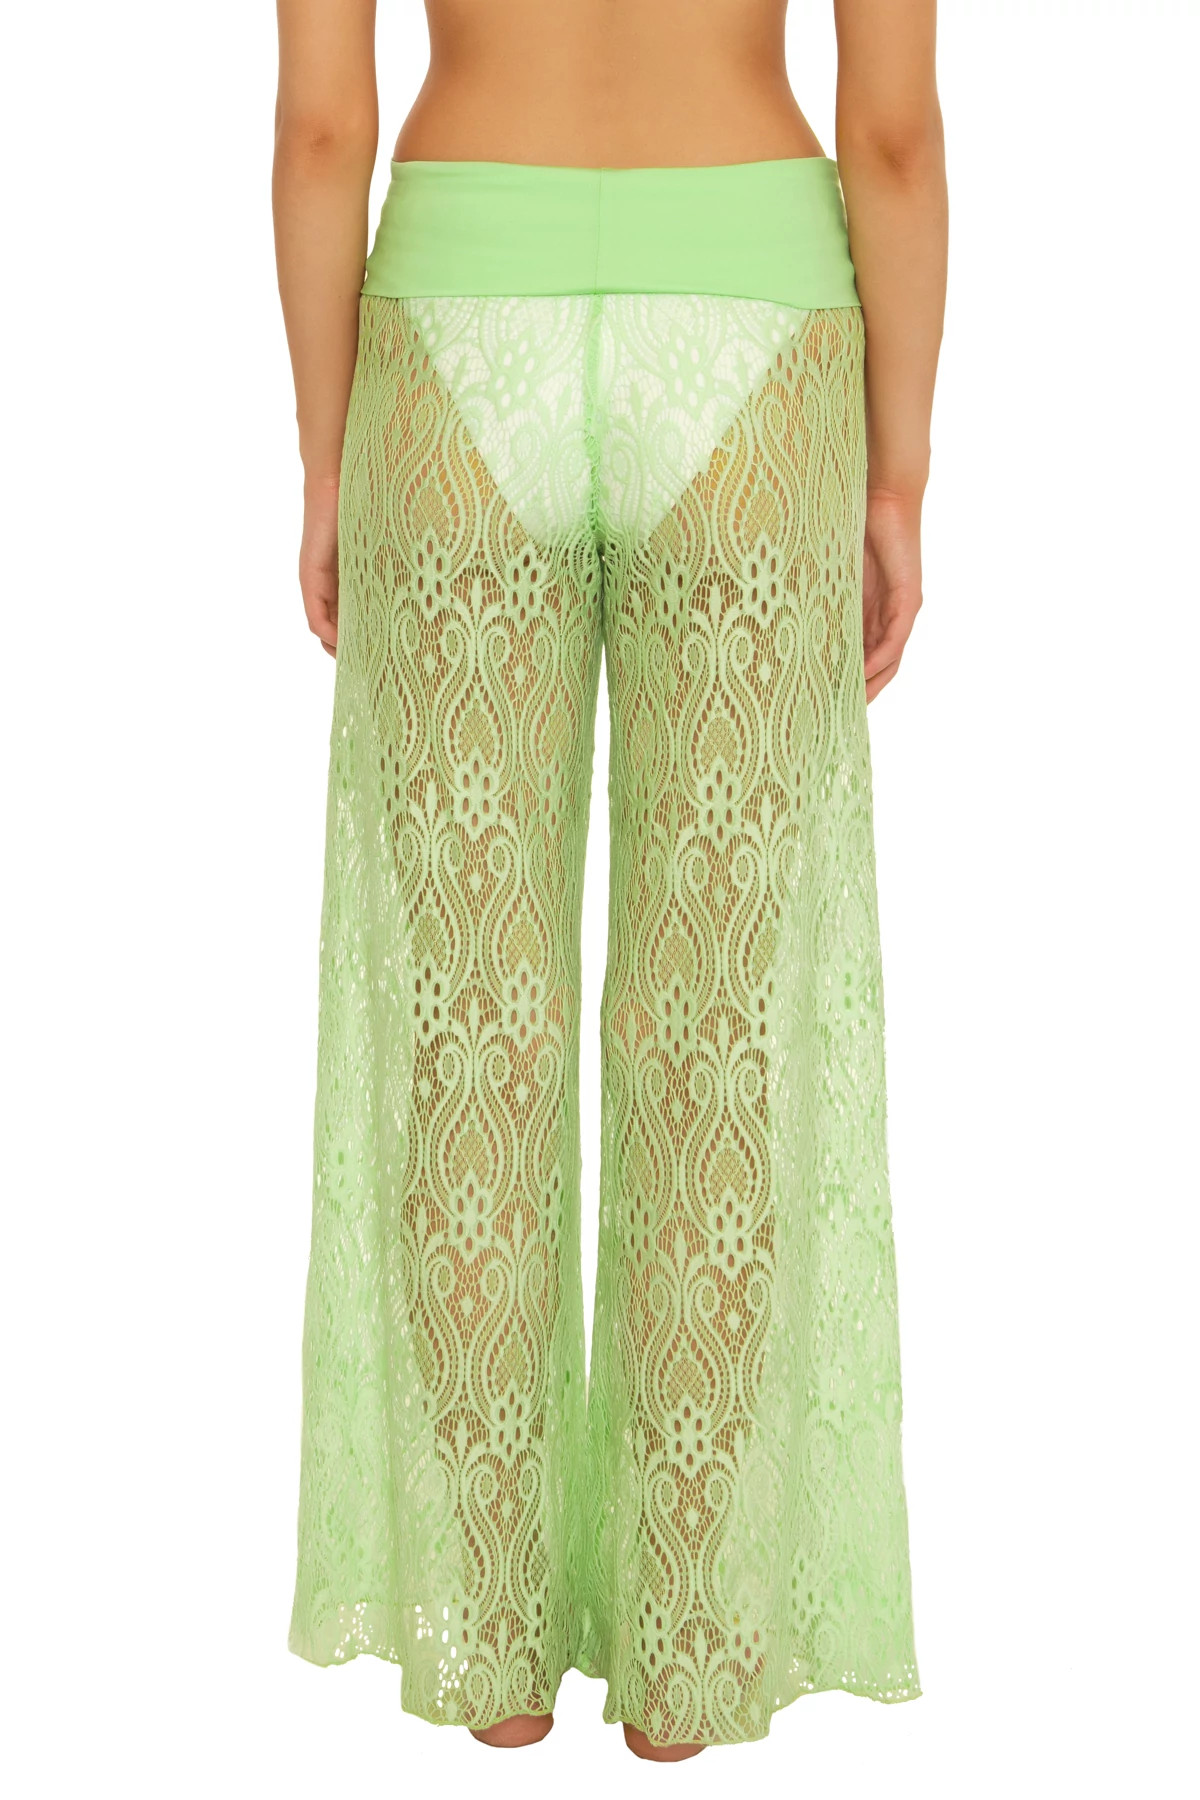 PISTACHIO Banded Lace Cover Up Pant image number 2